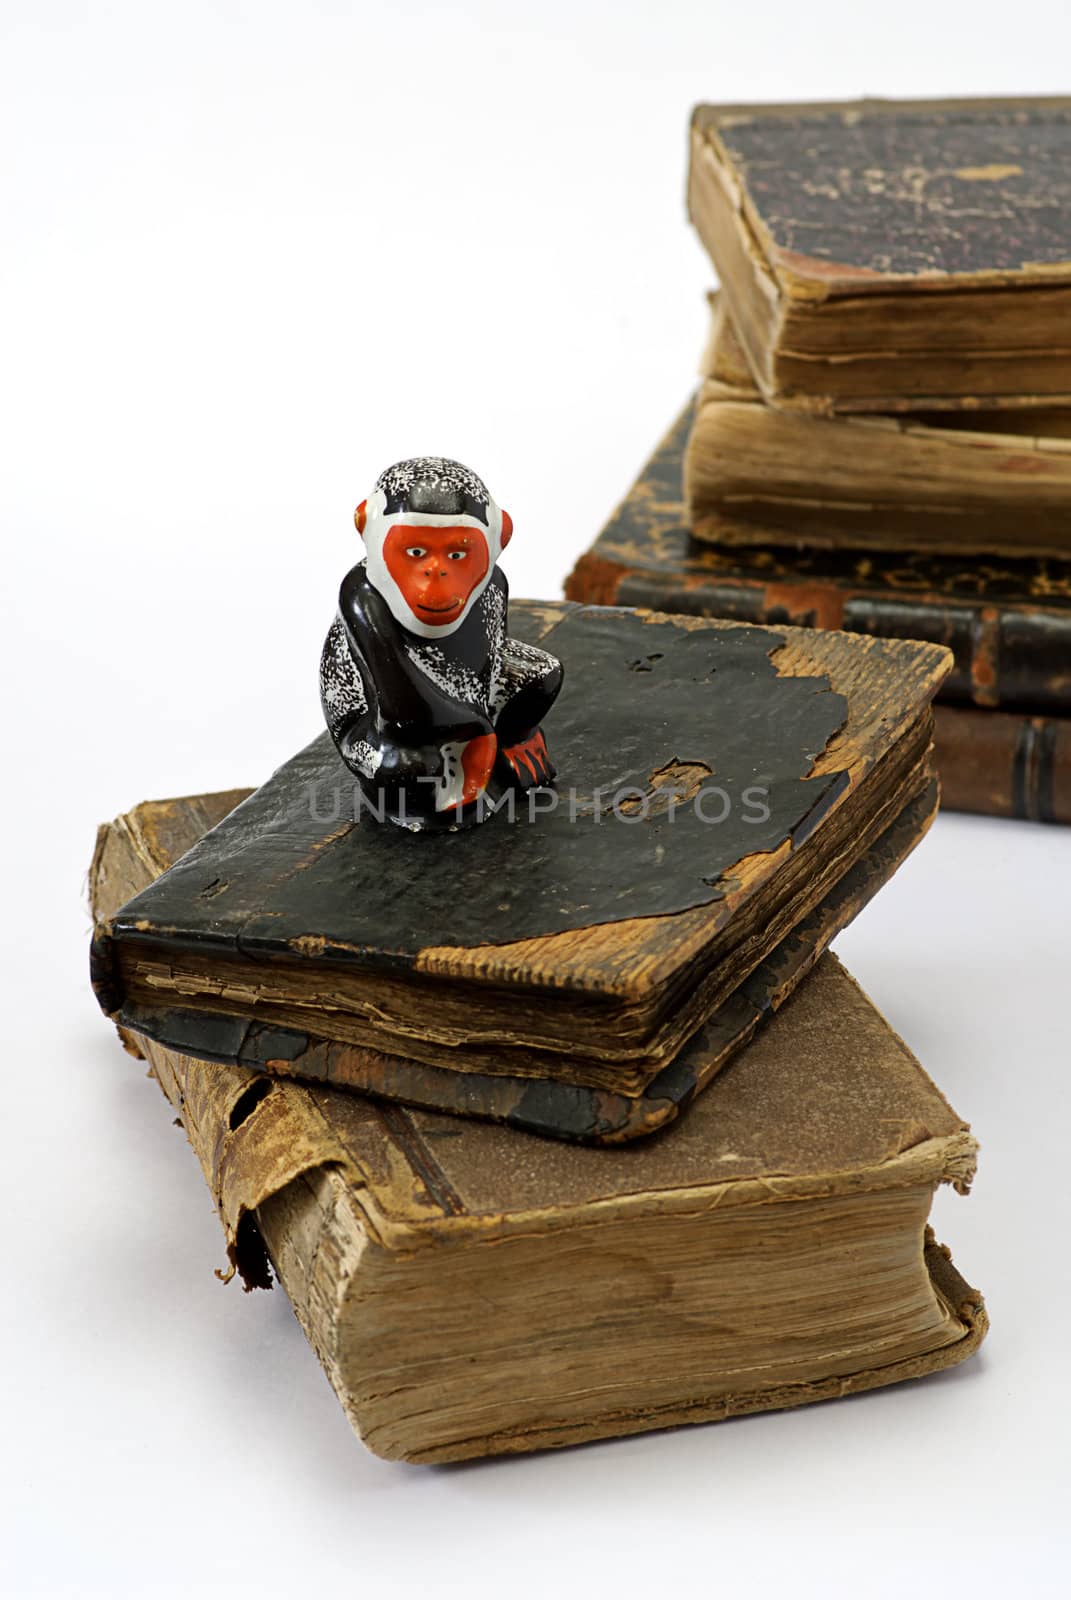 old religious books and monkey by vikinded